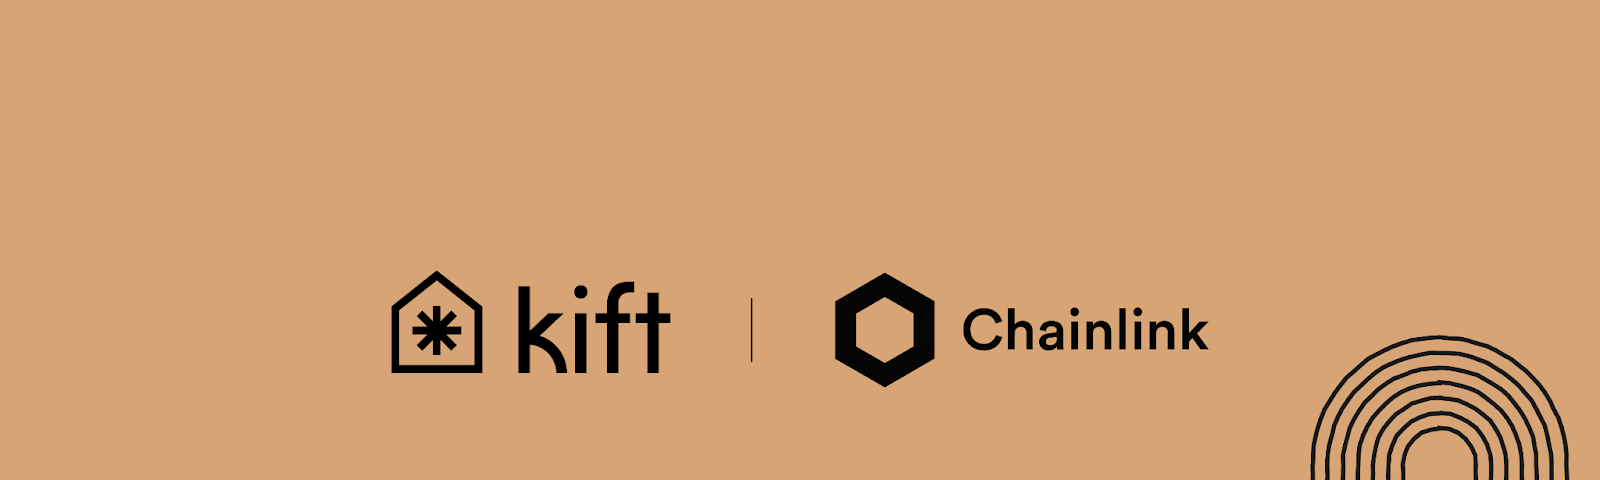 Kift DAO and Chainlink NFT collaboration image for vanlife NFT project launch